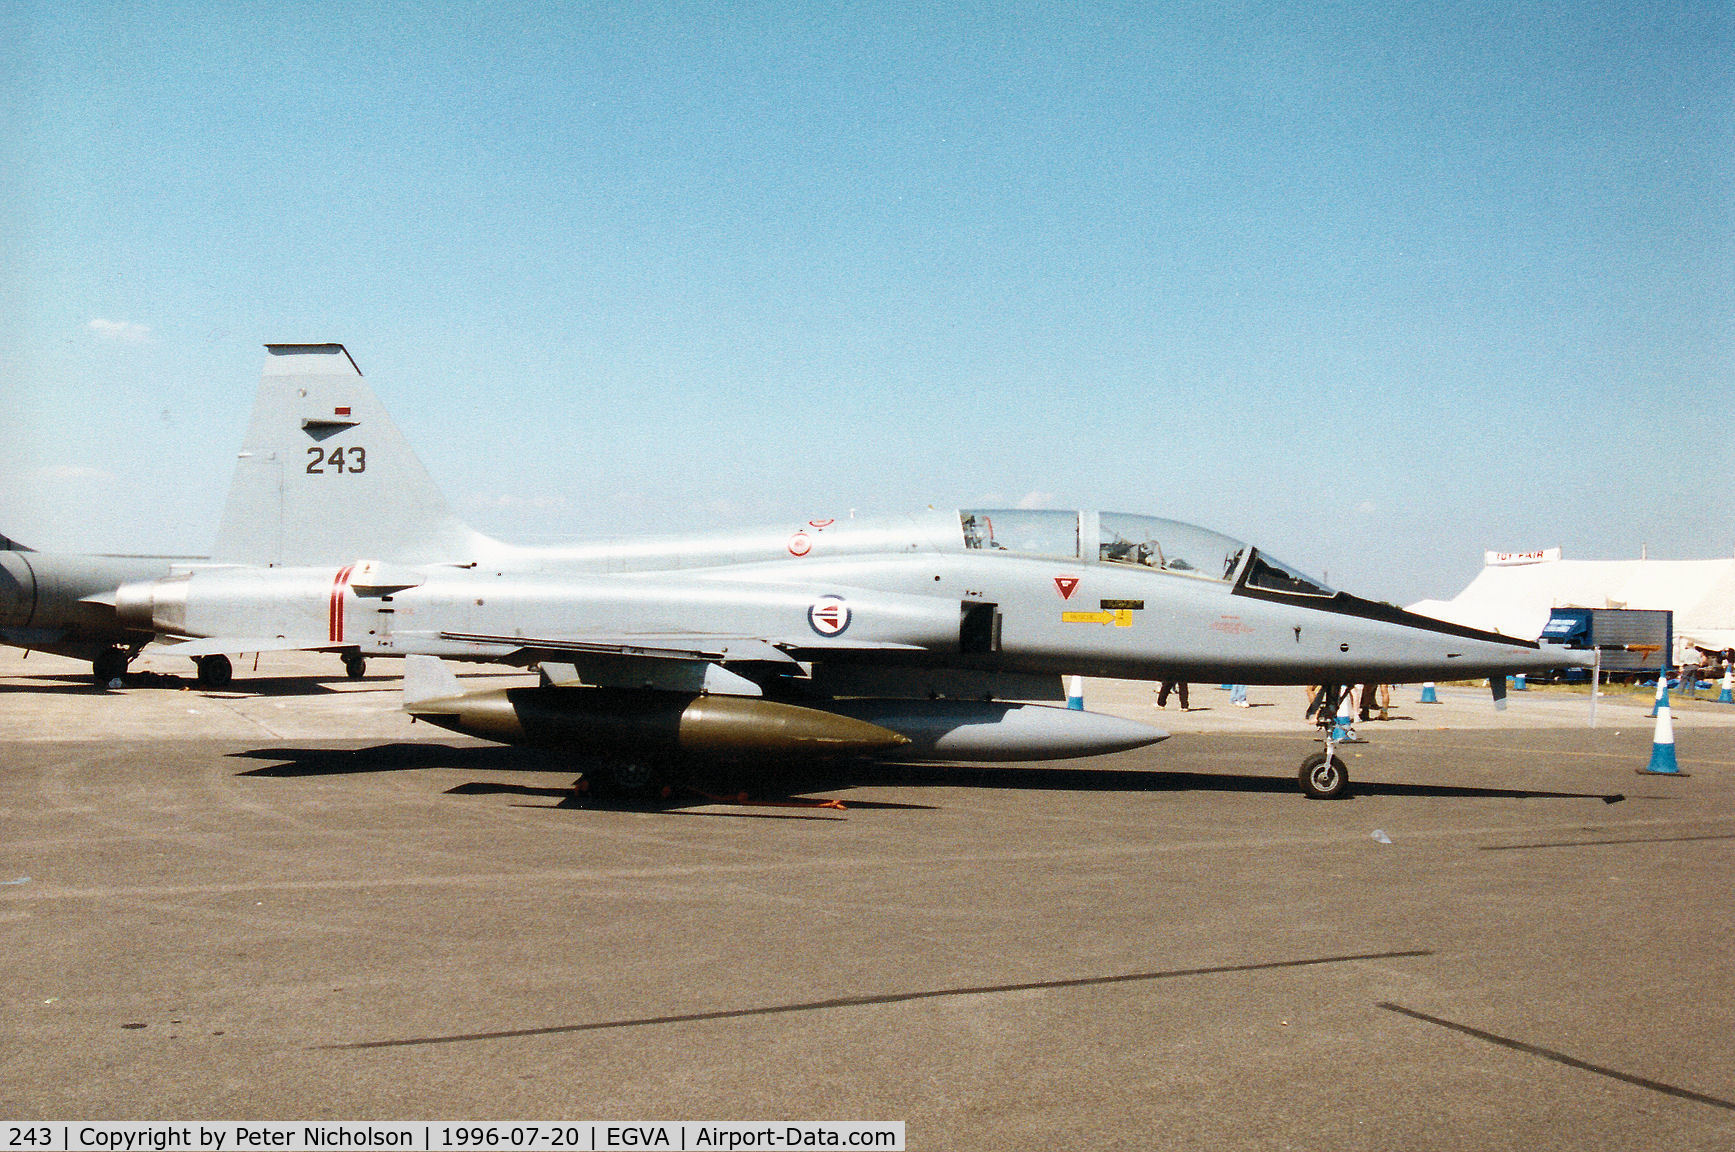 243, 1966 Northrop F-5B Freedom Fighter C/N N.9007, F-5B Freedom Fighter of 336 Skv Royal Norwegian Air Force on display at the 1996 Royal Intnl Air Tattoo at RAF Fairford.